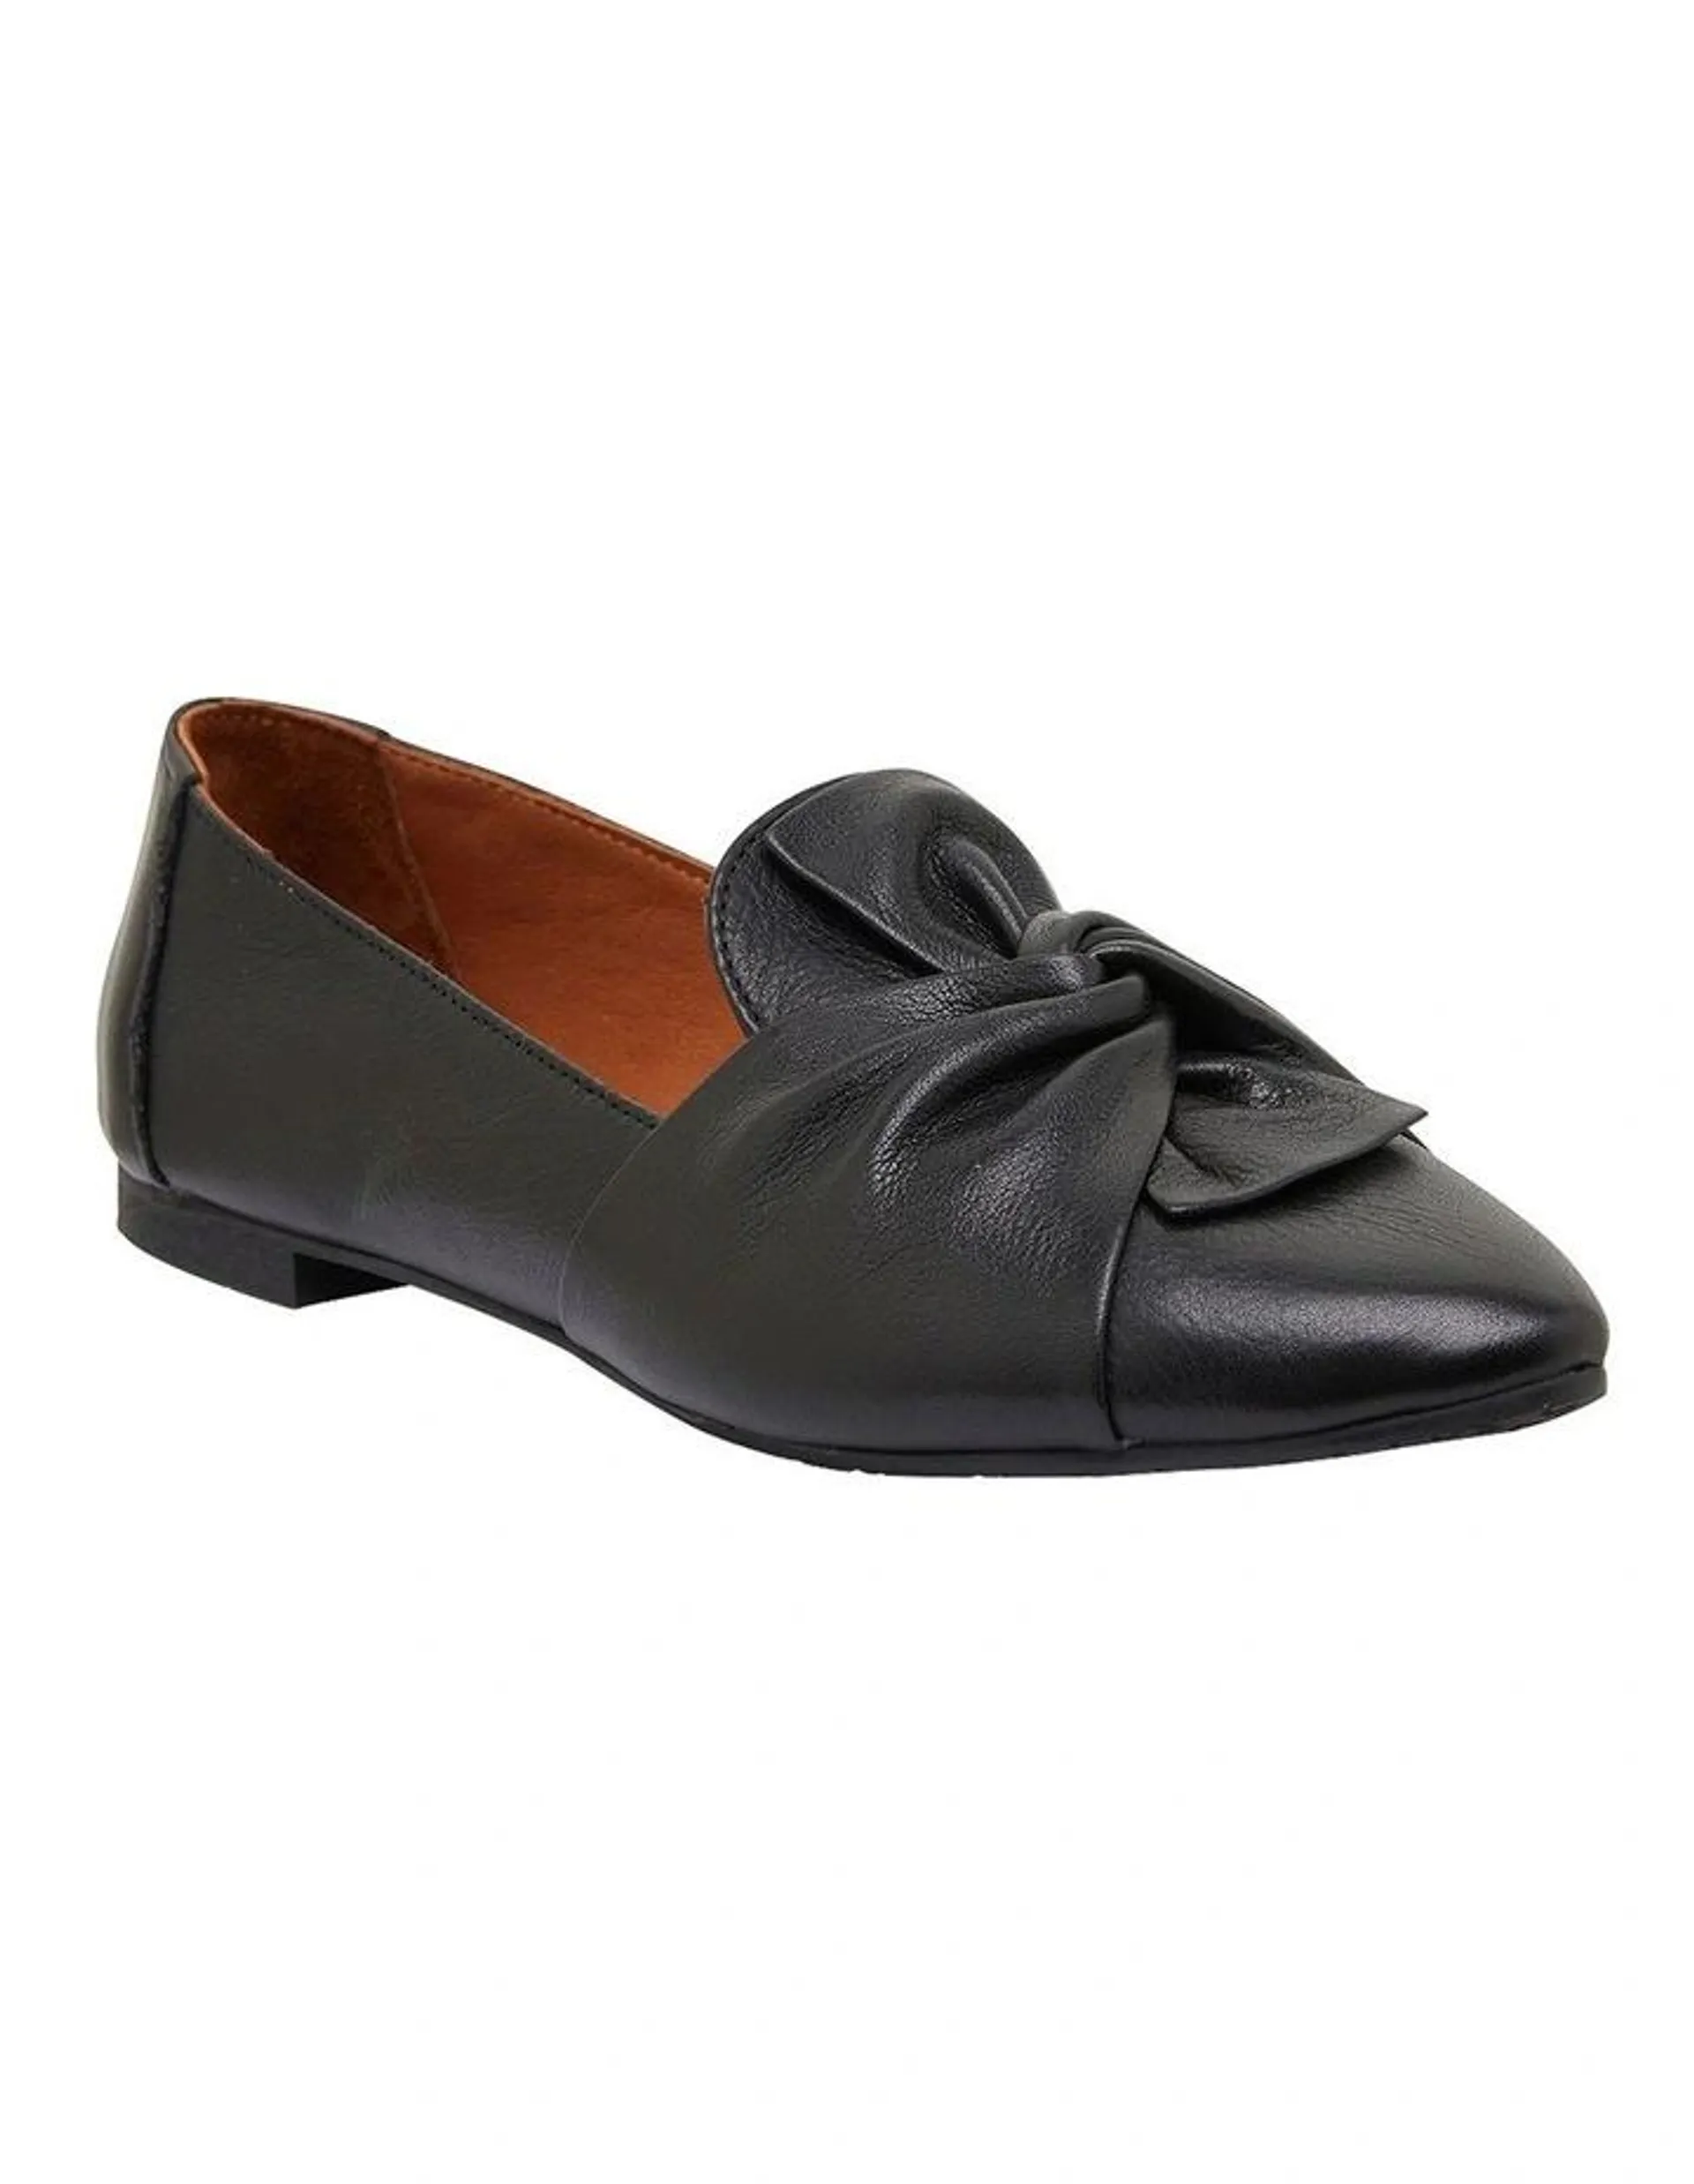 Rosco Flat Shoes in Black Leather